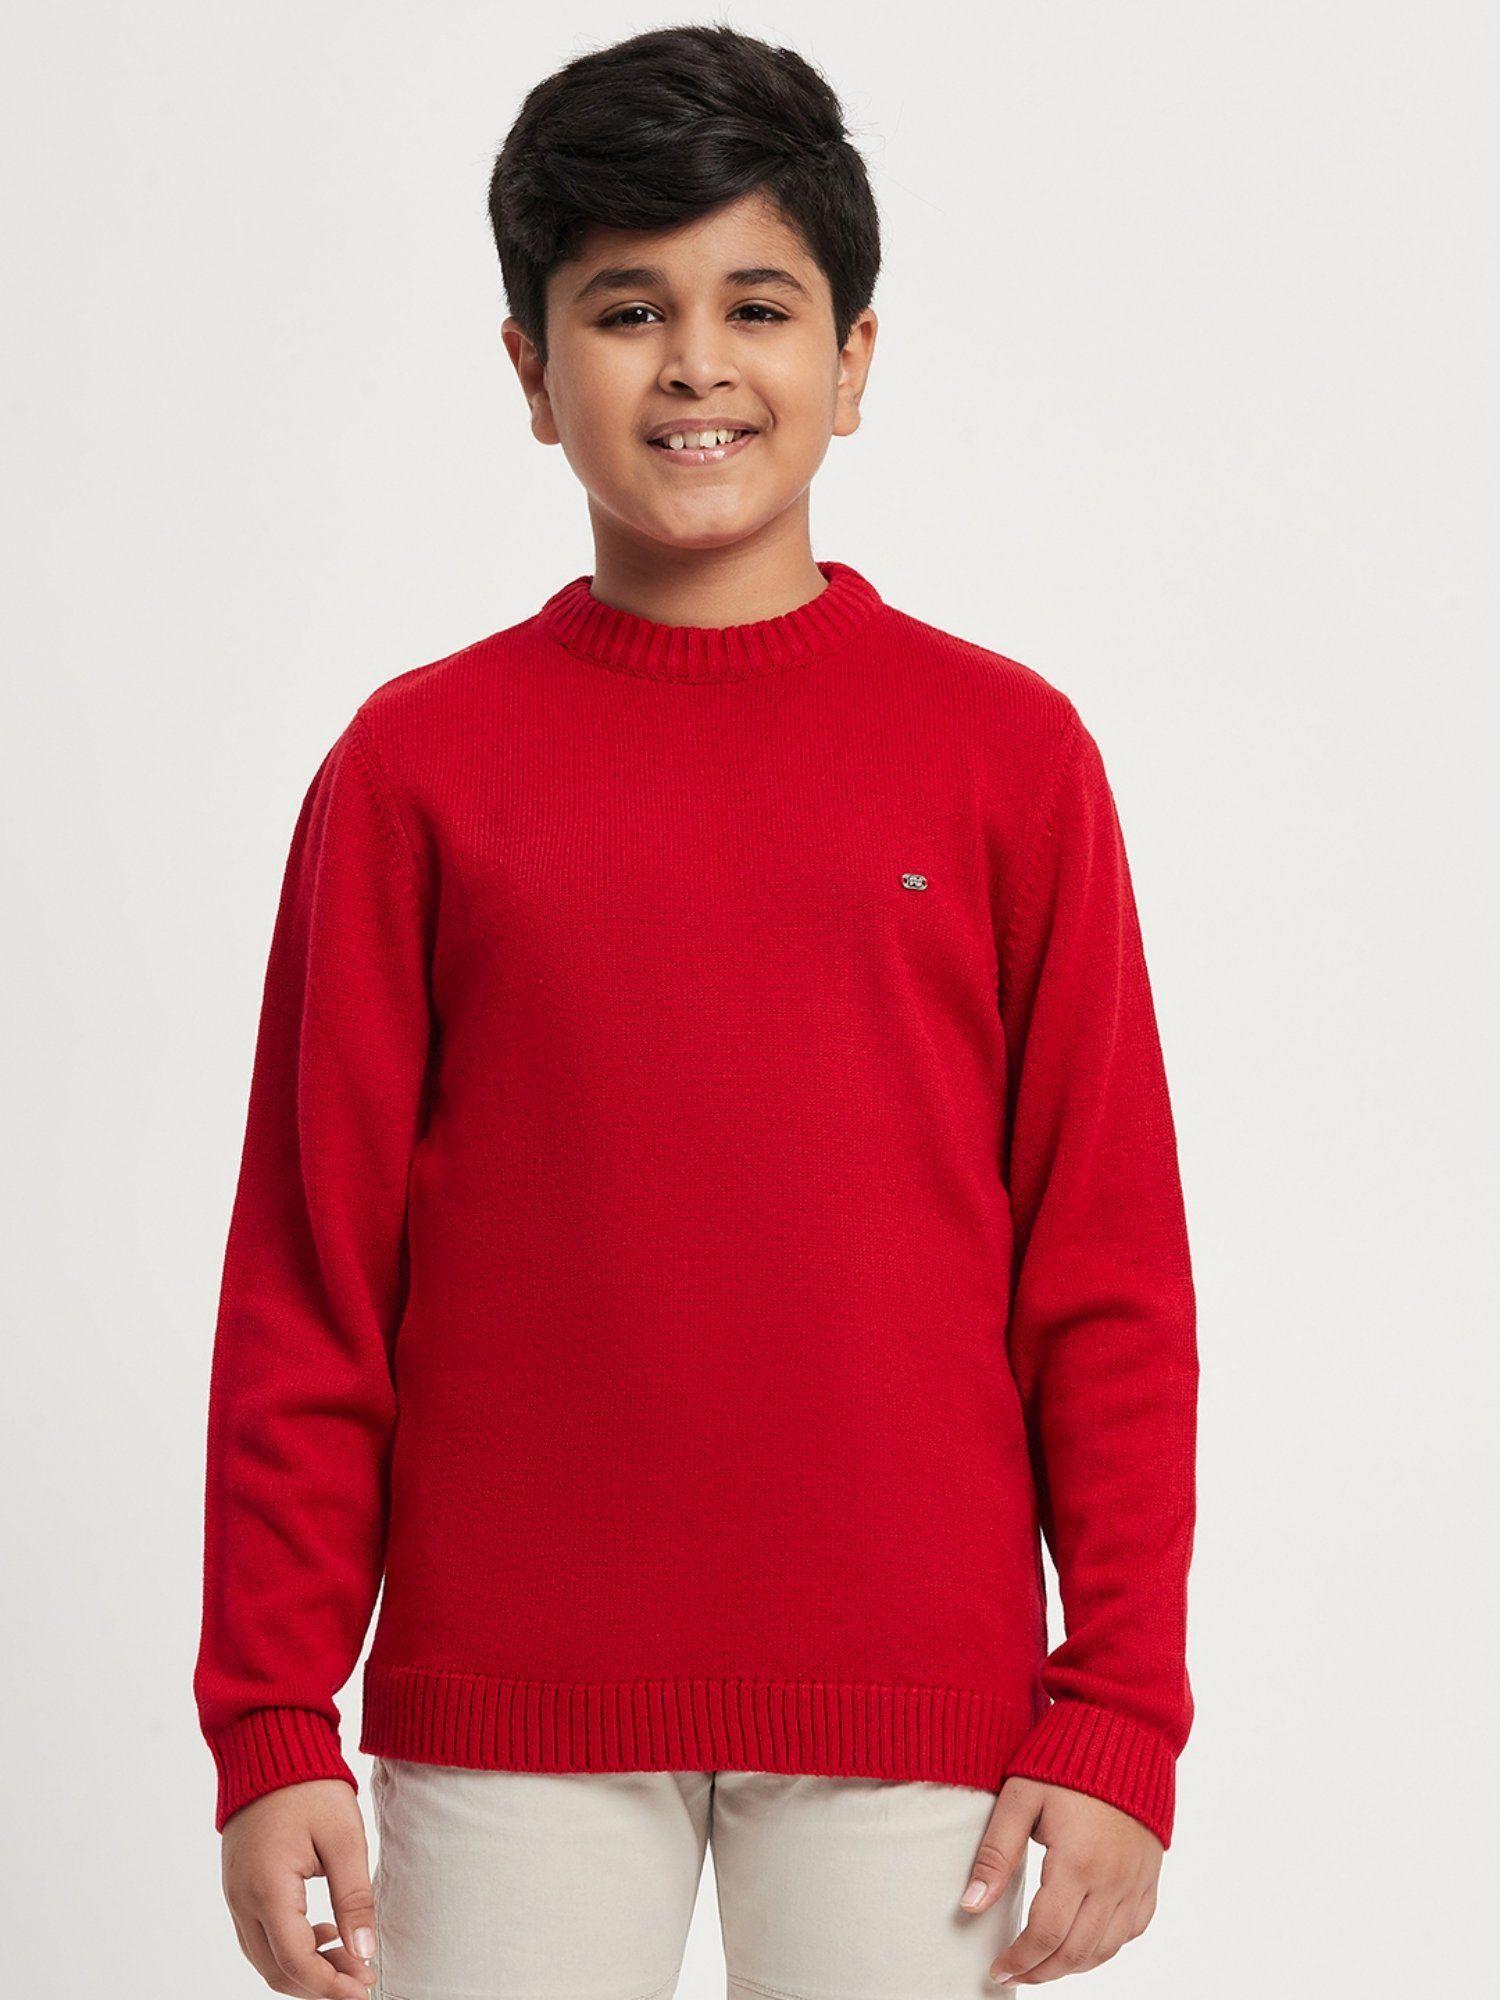 unisex-red-woven-full-sleeves-round-neck-sweater